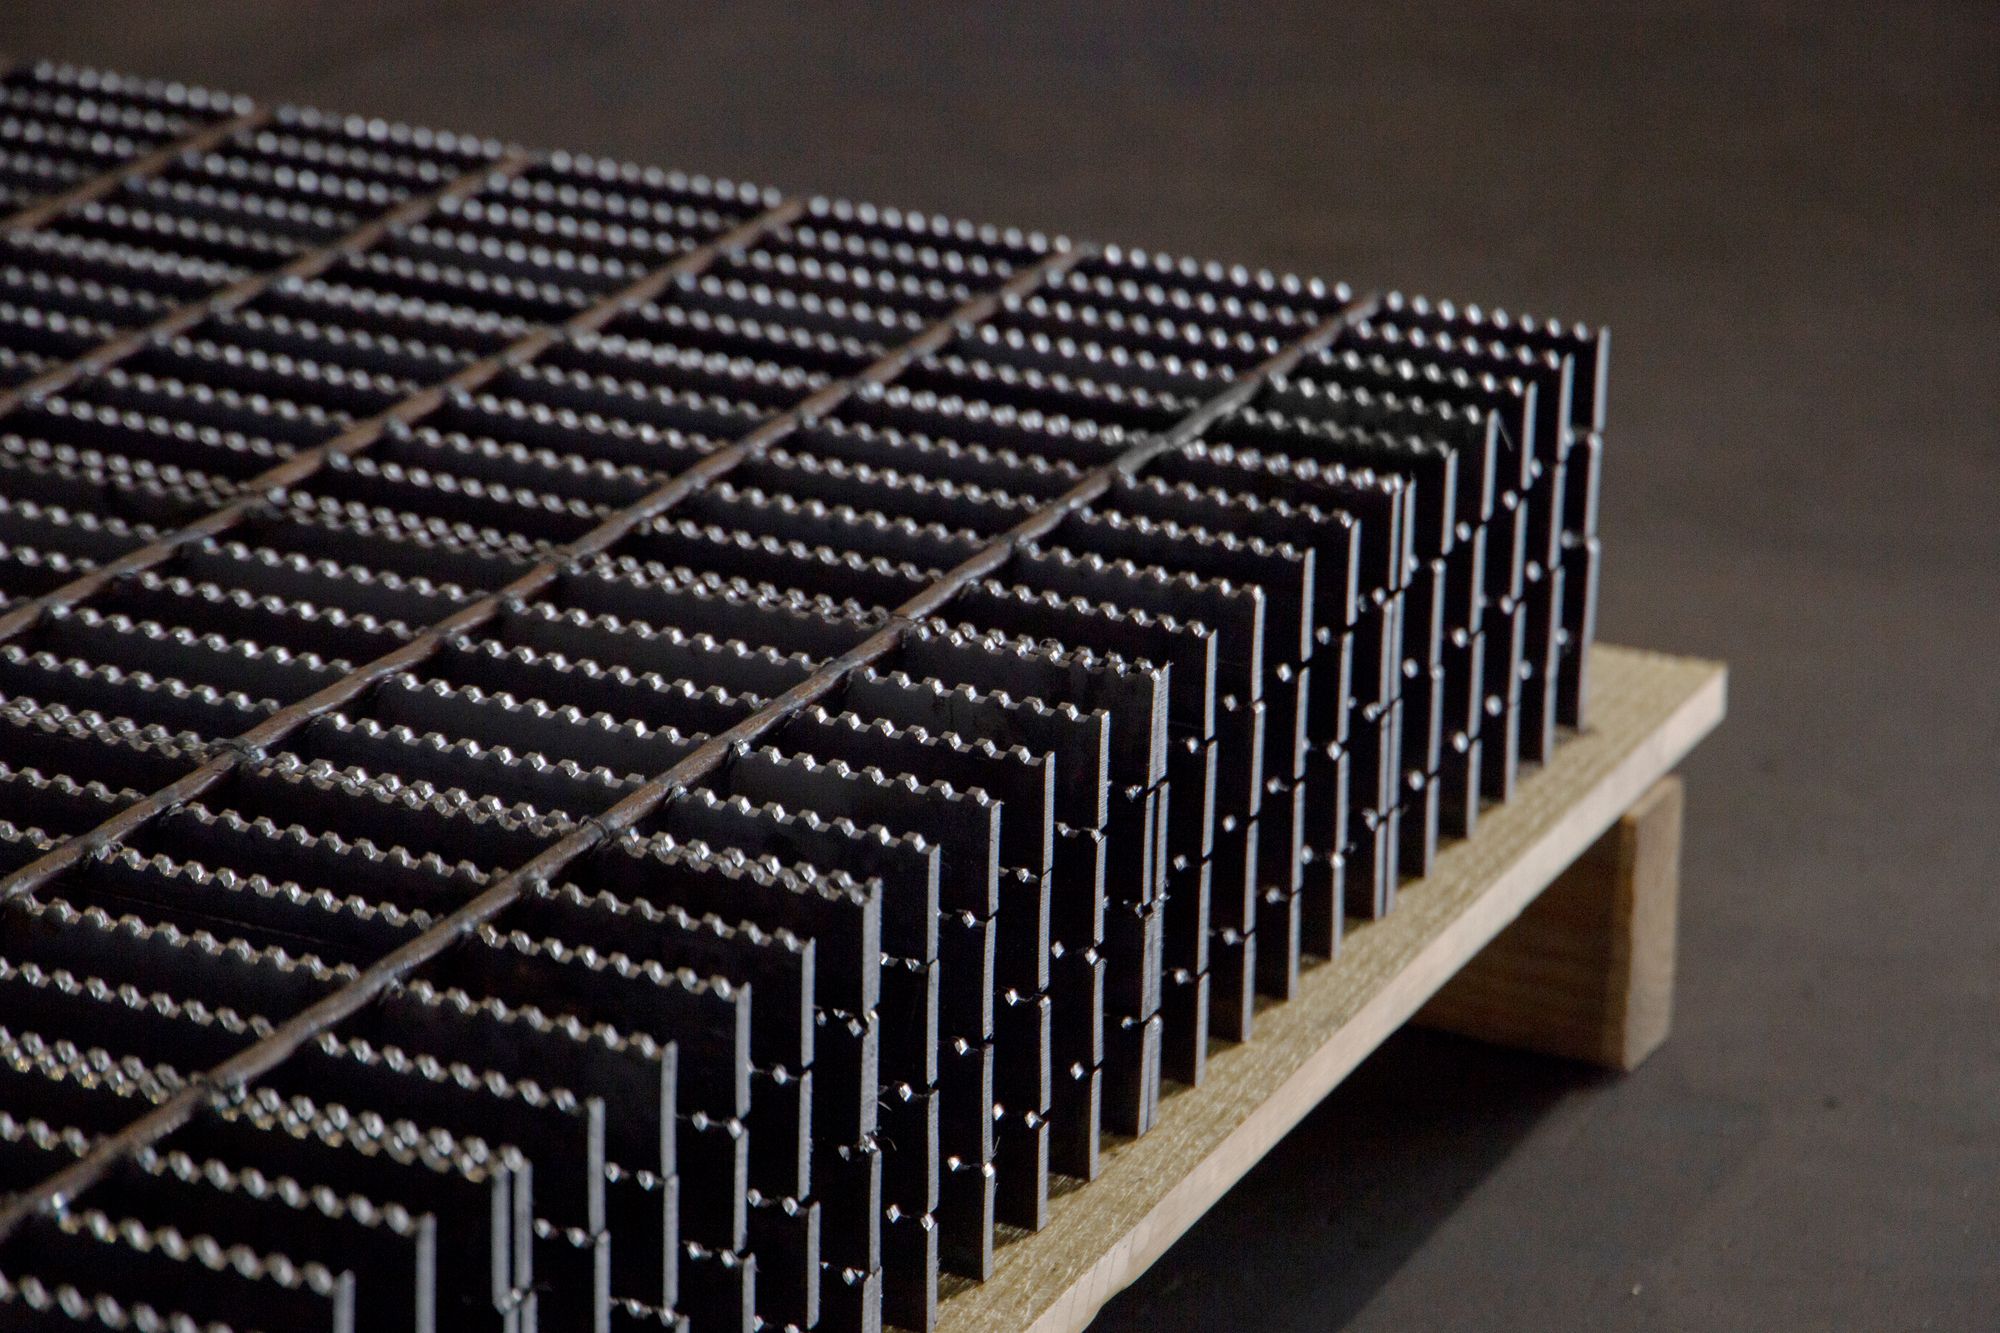 Four pieces of Serrated Bar Grating stacked on top of a wooden pallet.